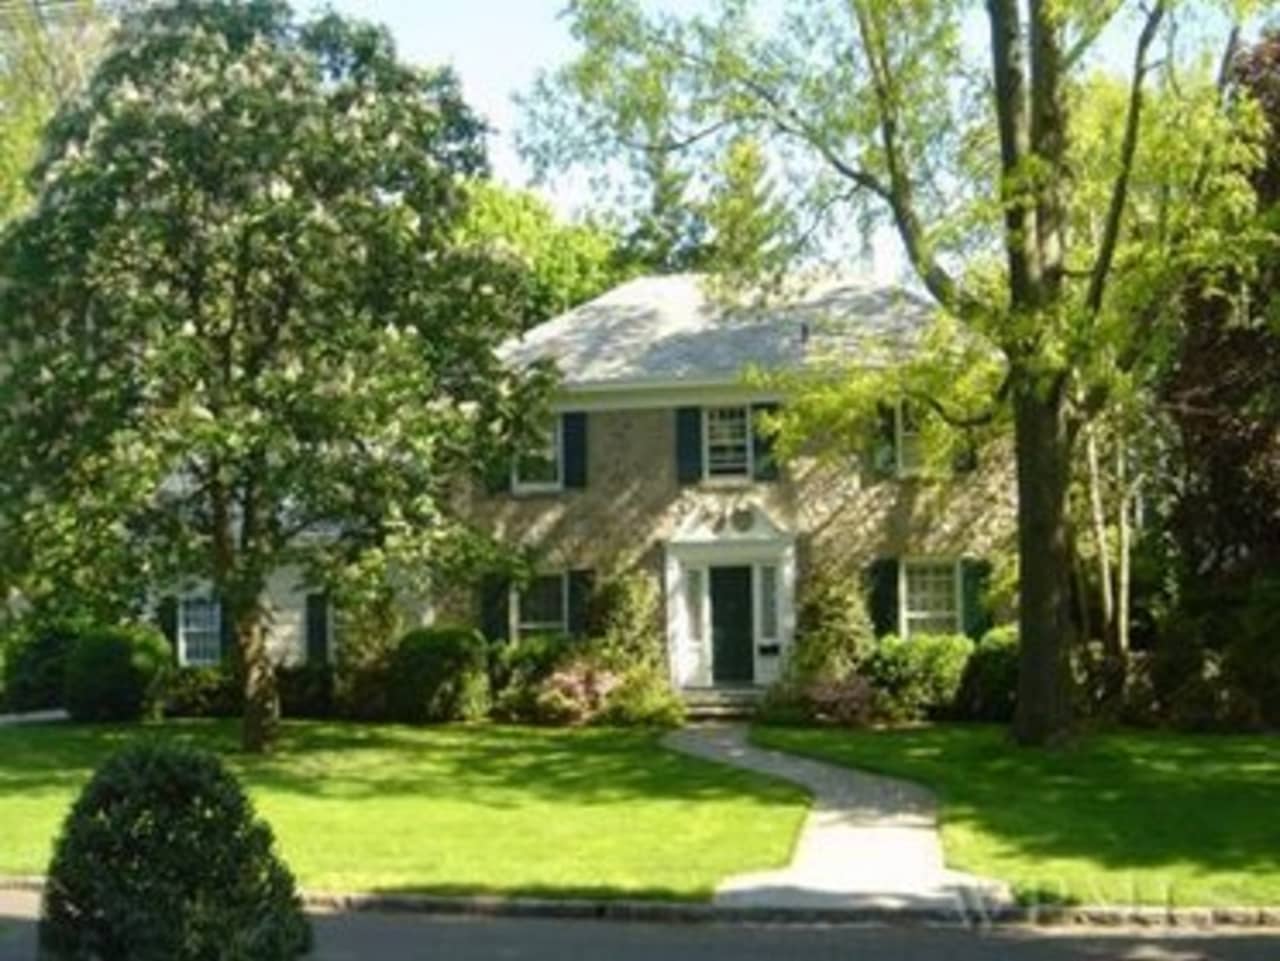 This house at 6 Paddington Road in Bronxville is open for viewing this Sunday.